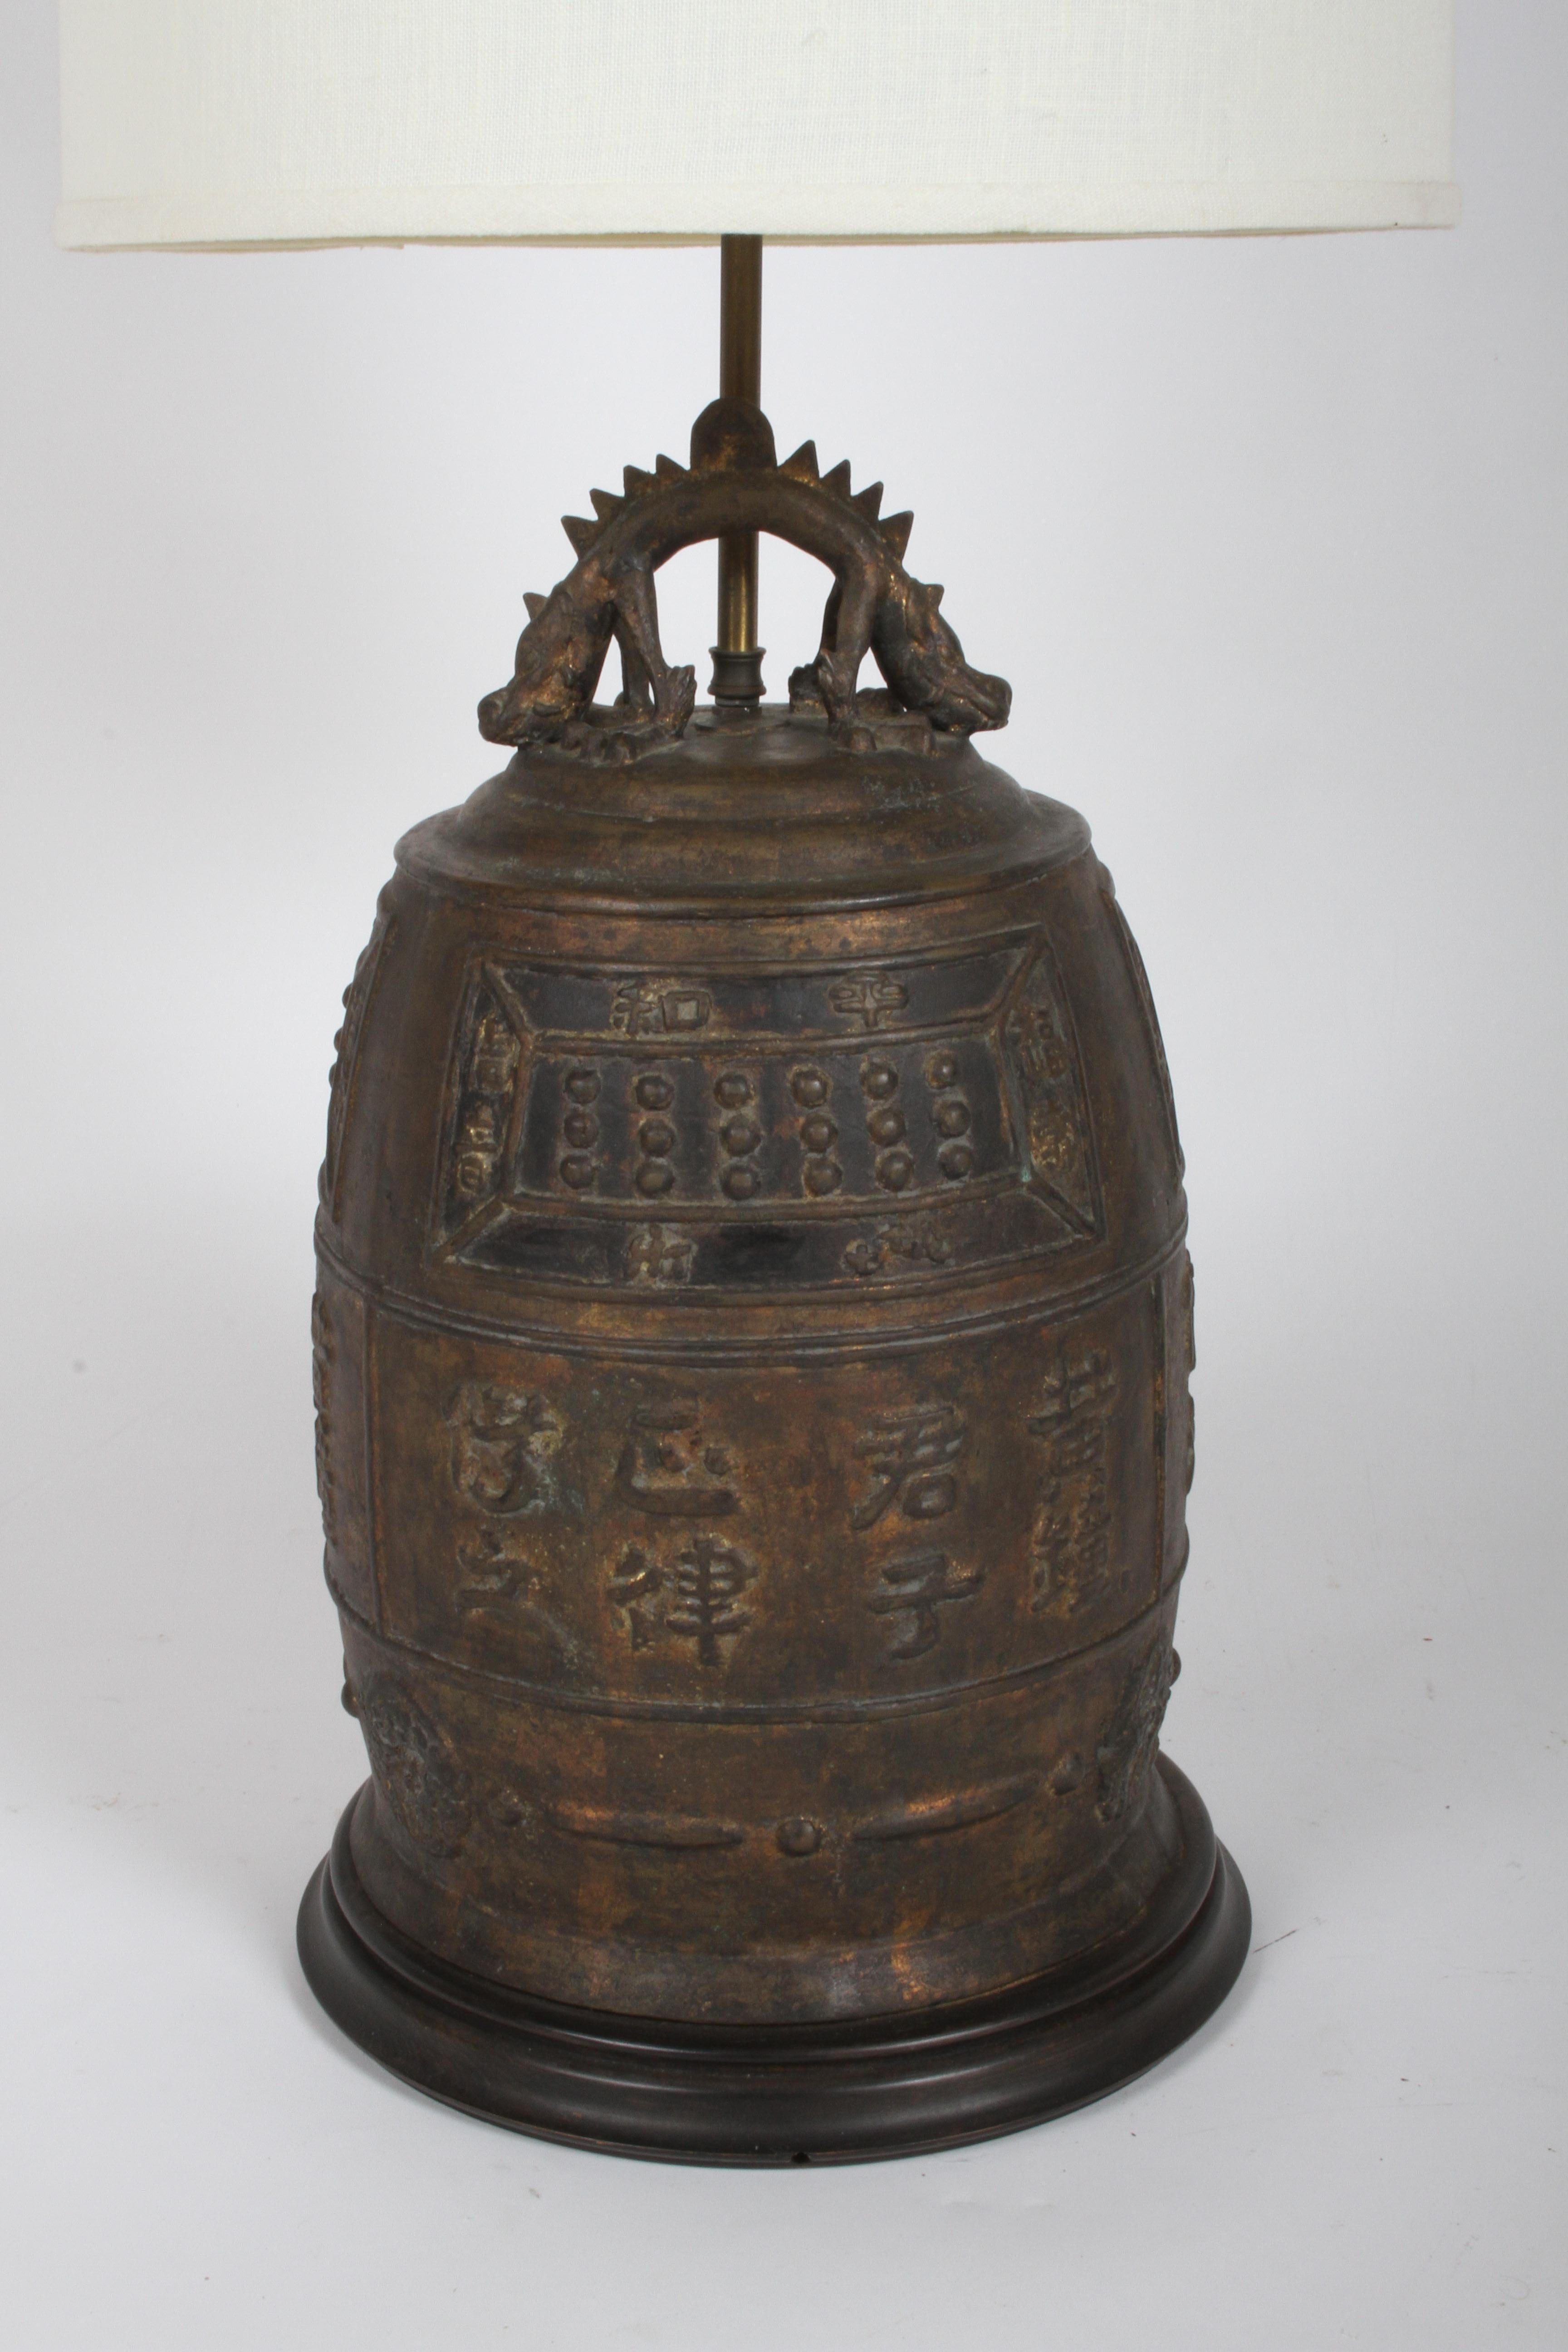 Large vintage Asian / Oriental table lamp of a bronze drum with symbols, signs of gilt , with two headed dragon at top. Came out of an interior of a mid-century modern home, possibly from the 50's or earlier. Working condition, will get new cord,